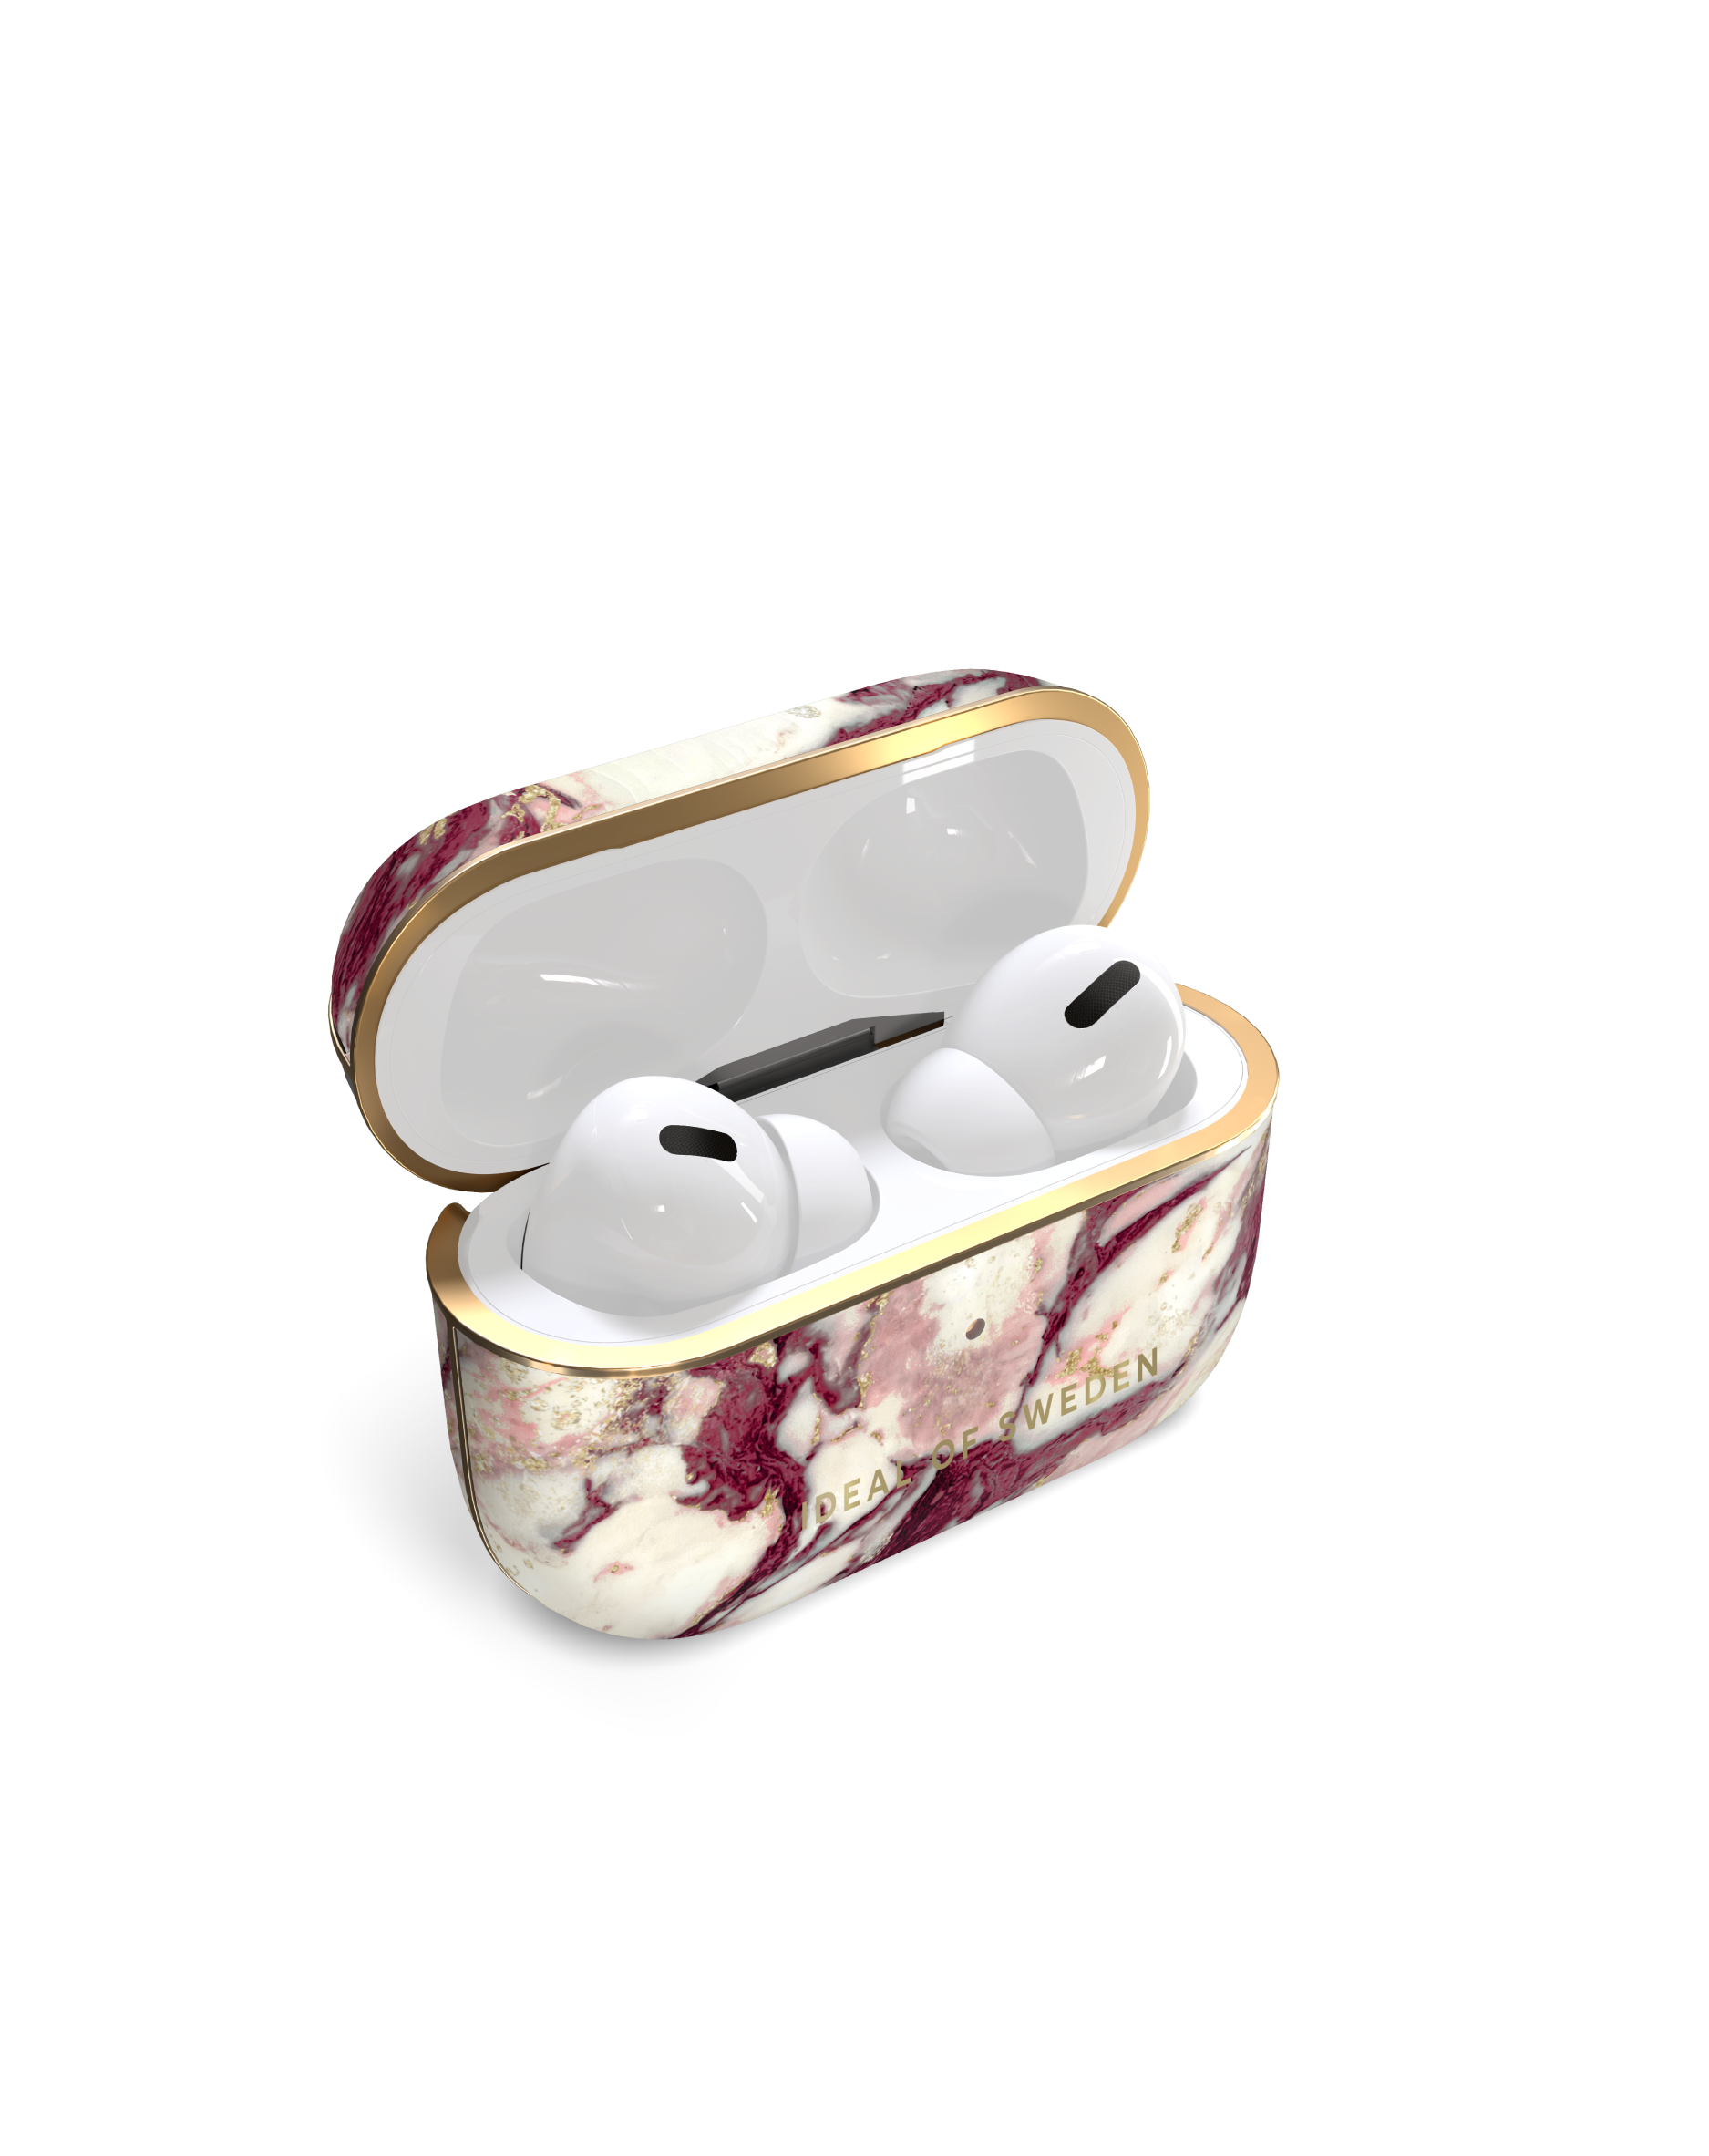 OF Ruby Marble Case SWEDEN Calacatta IDFAPCMR21-PRO-378 Apple IDEAL AirPod passend für: Full Cover